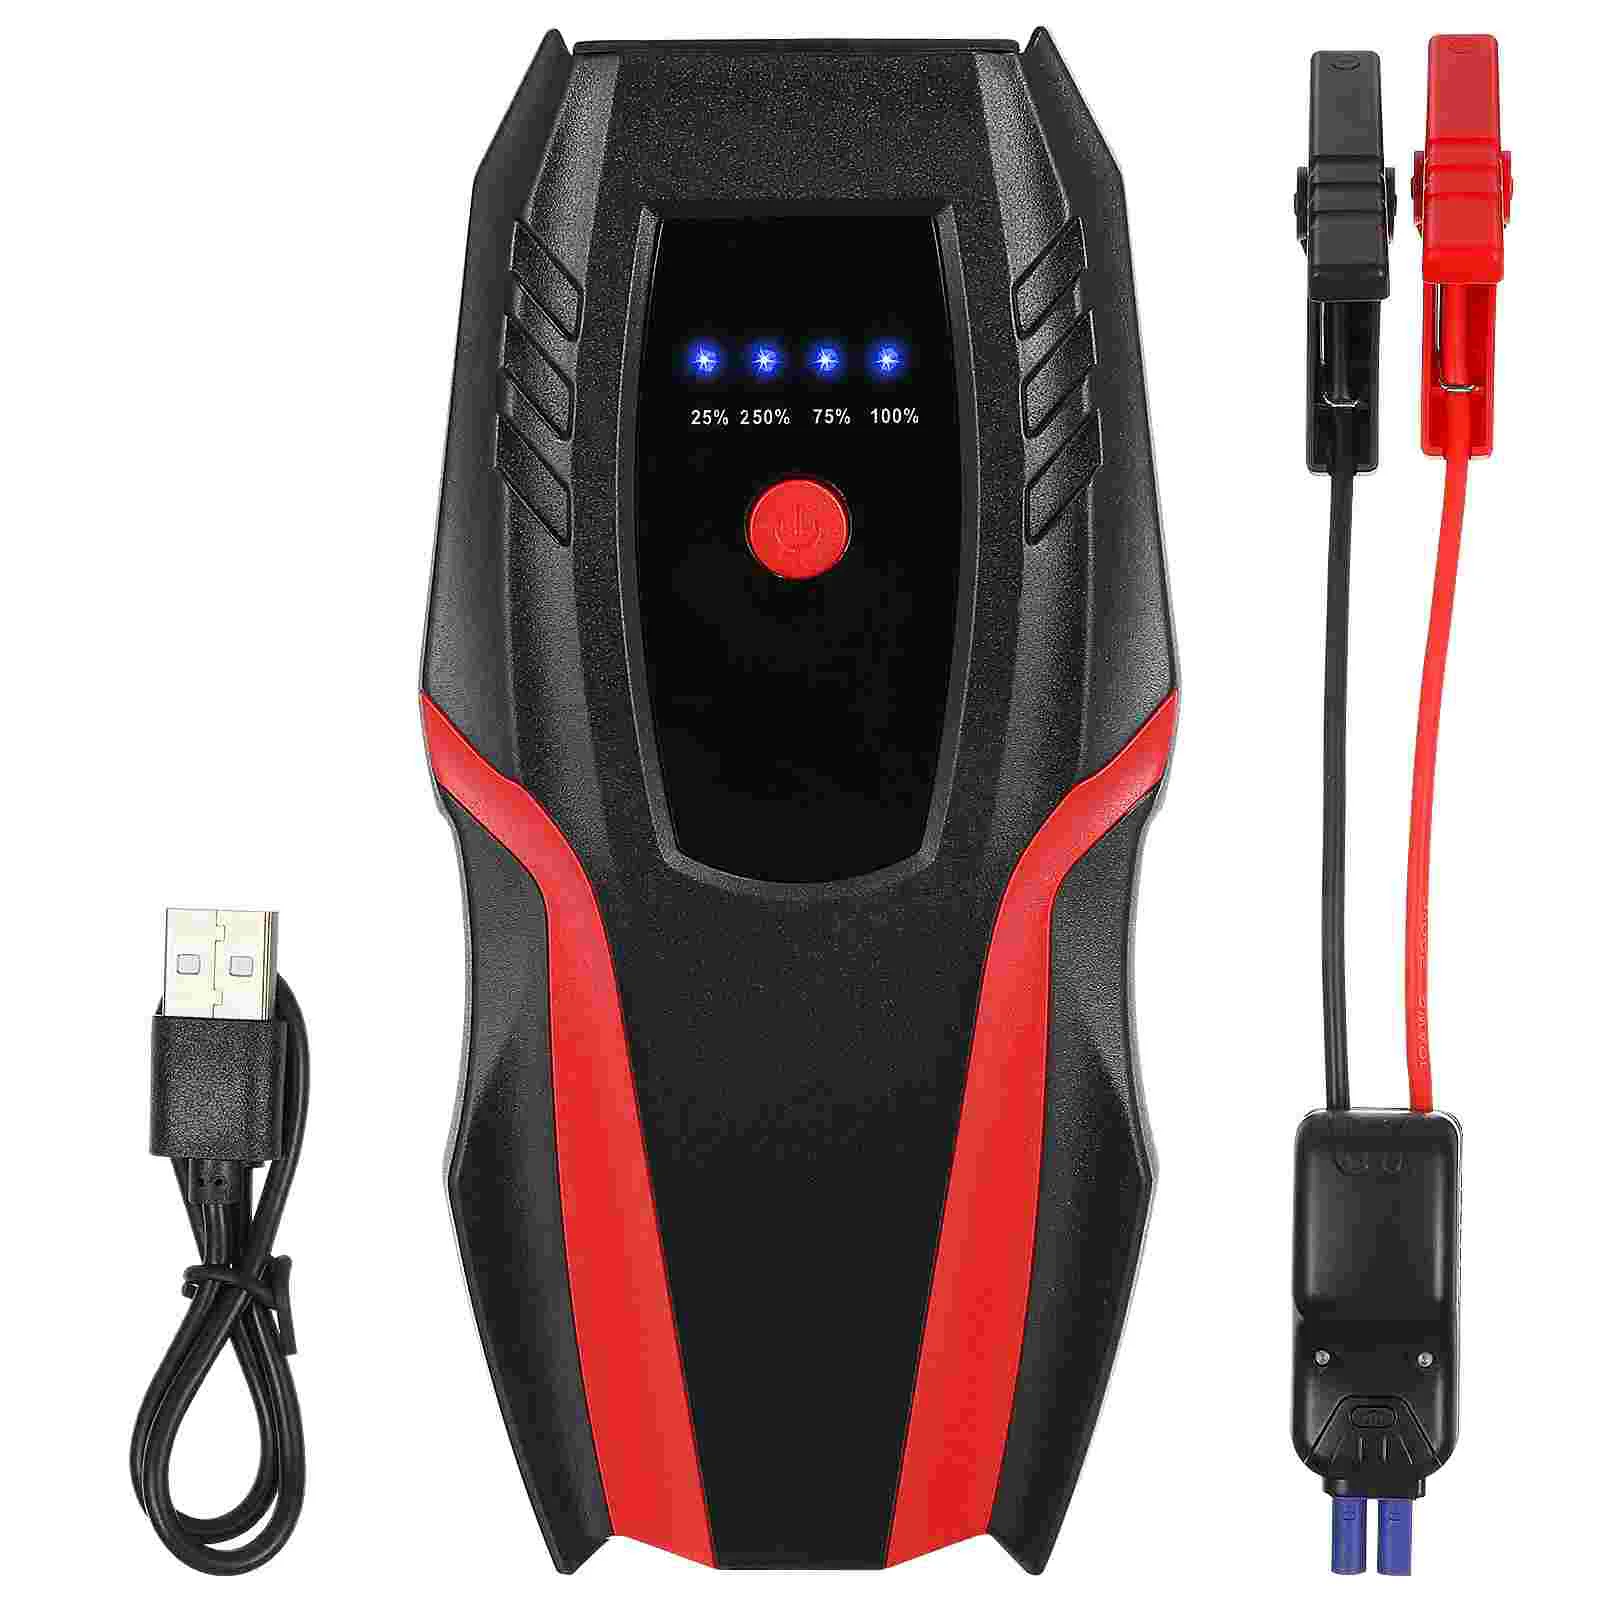 

Power Bank Jump Starter Chargers Auto Automotive Supplies Booster Vehicle Portable Car Starting